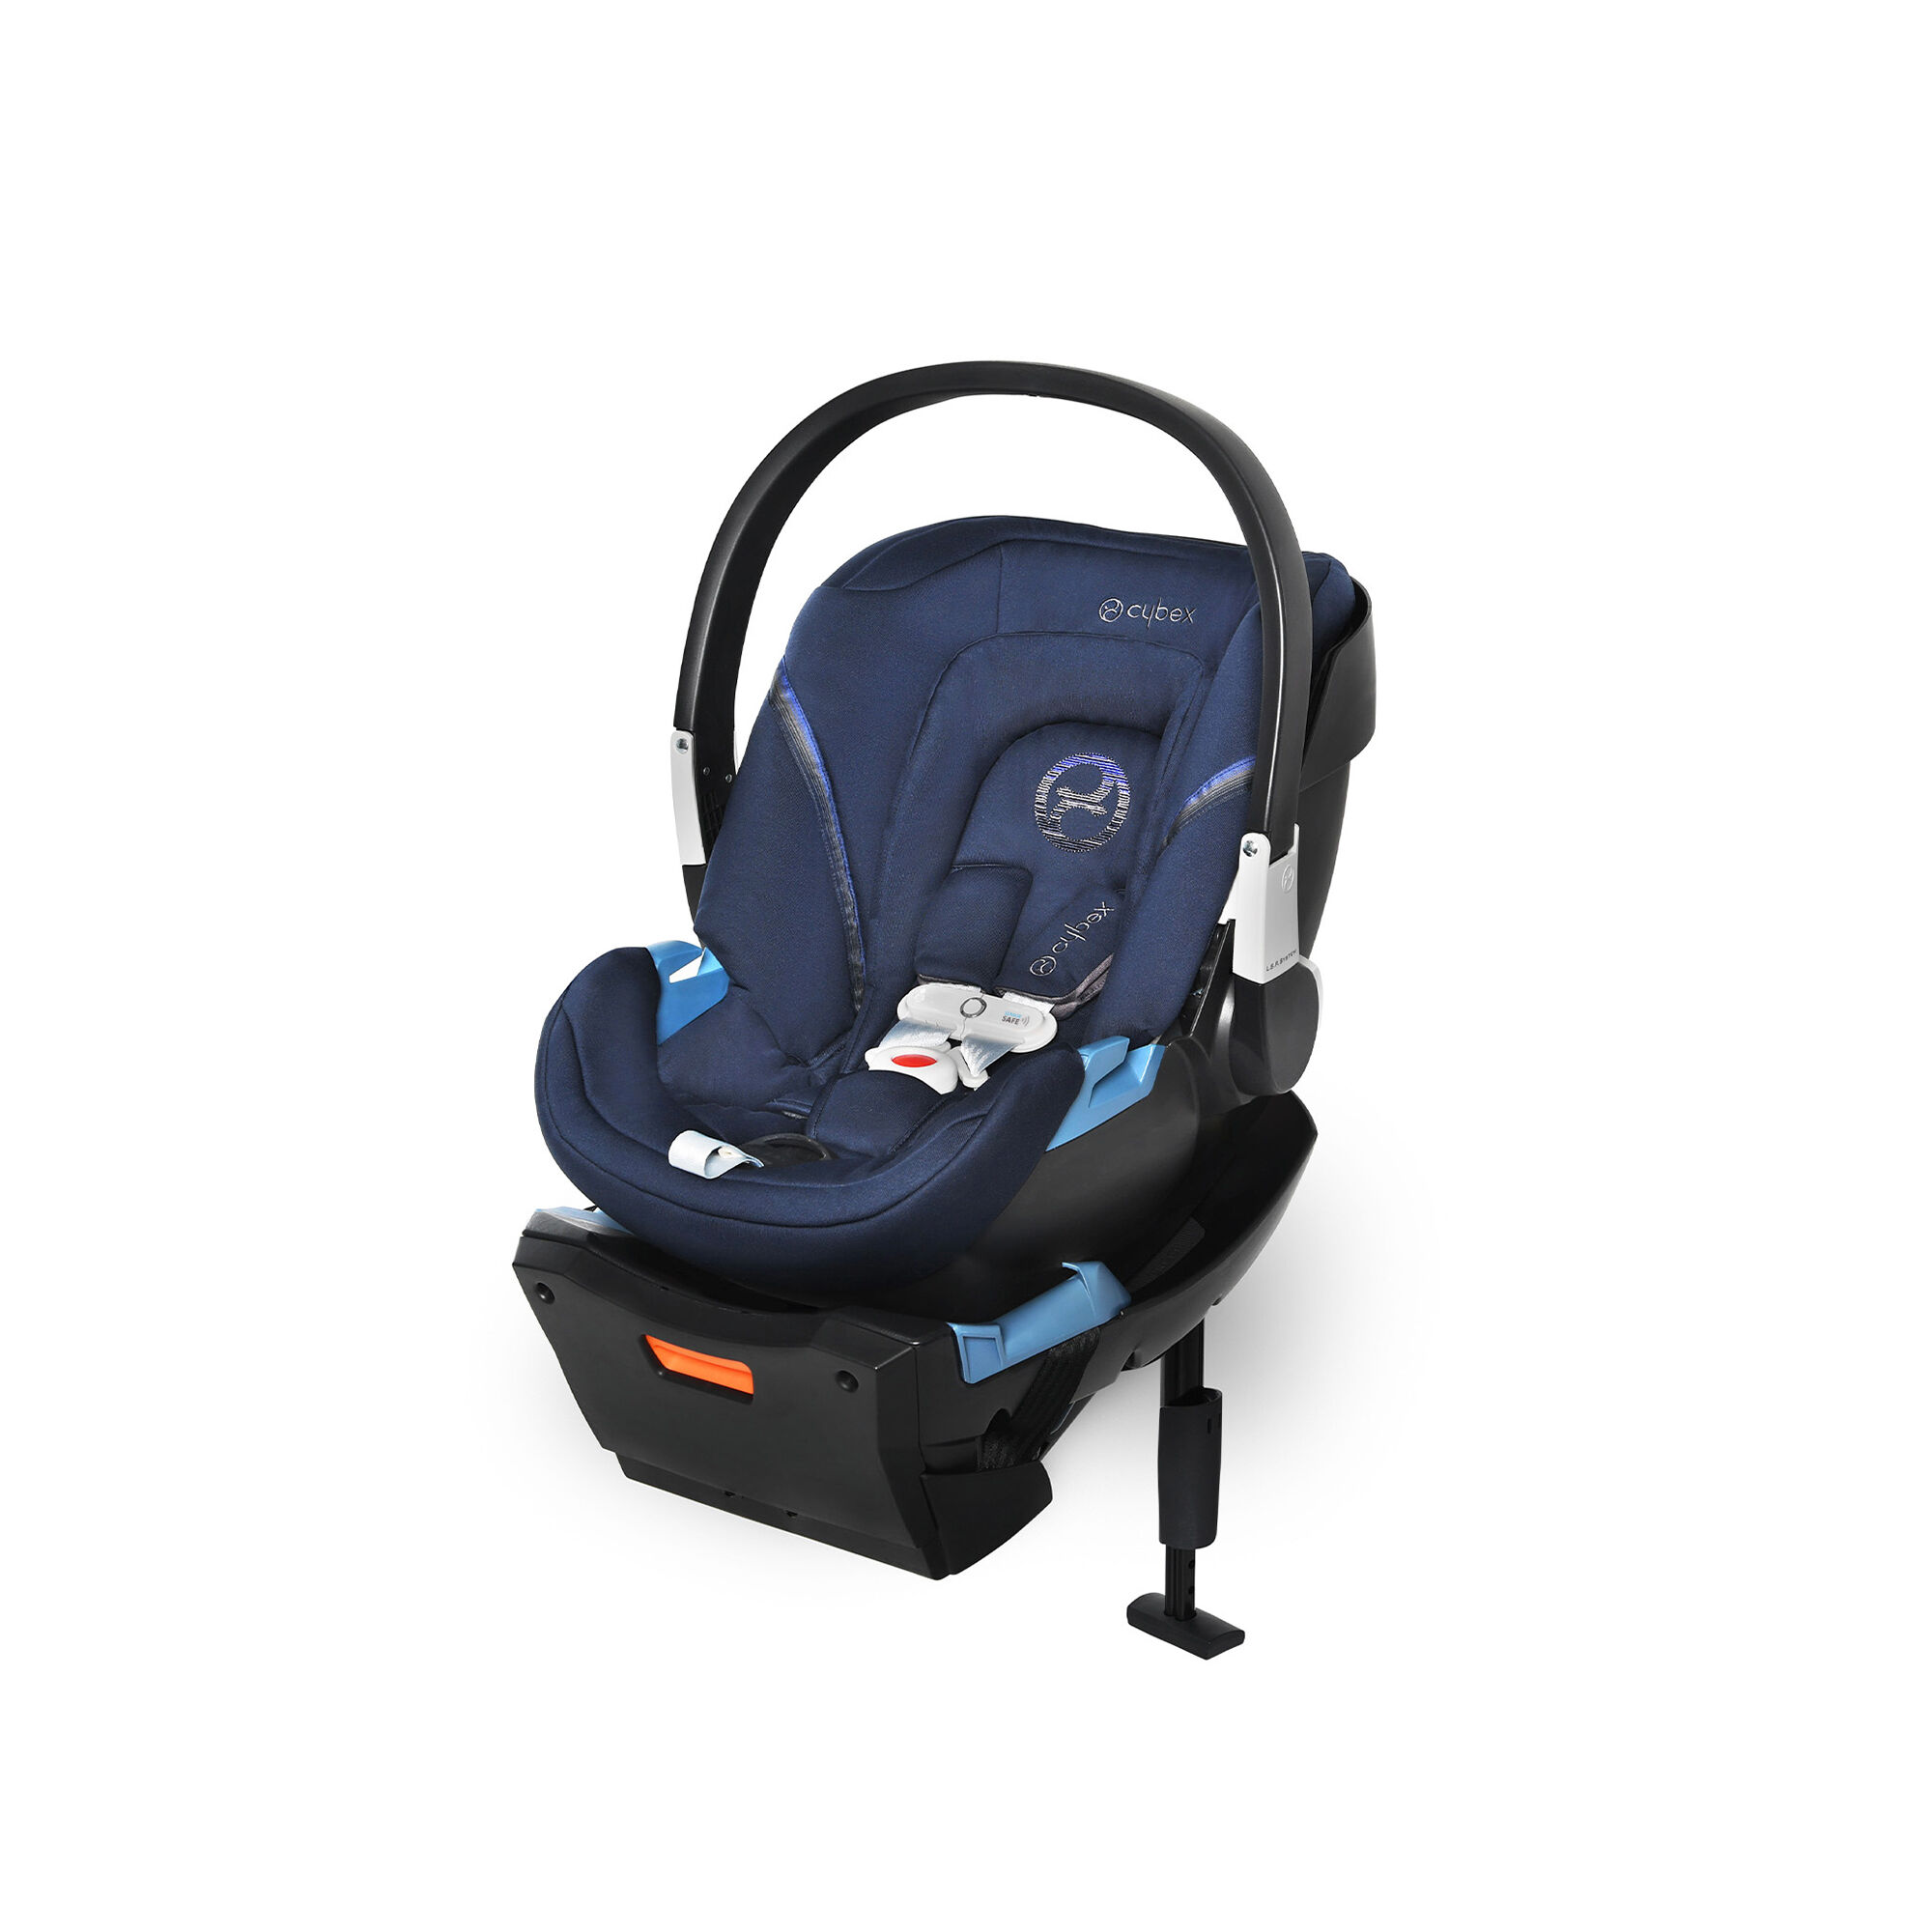 CYBEX Aton 2 with SensorSafe | Official CYBEX Website